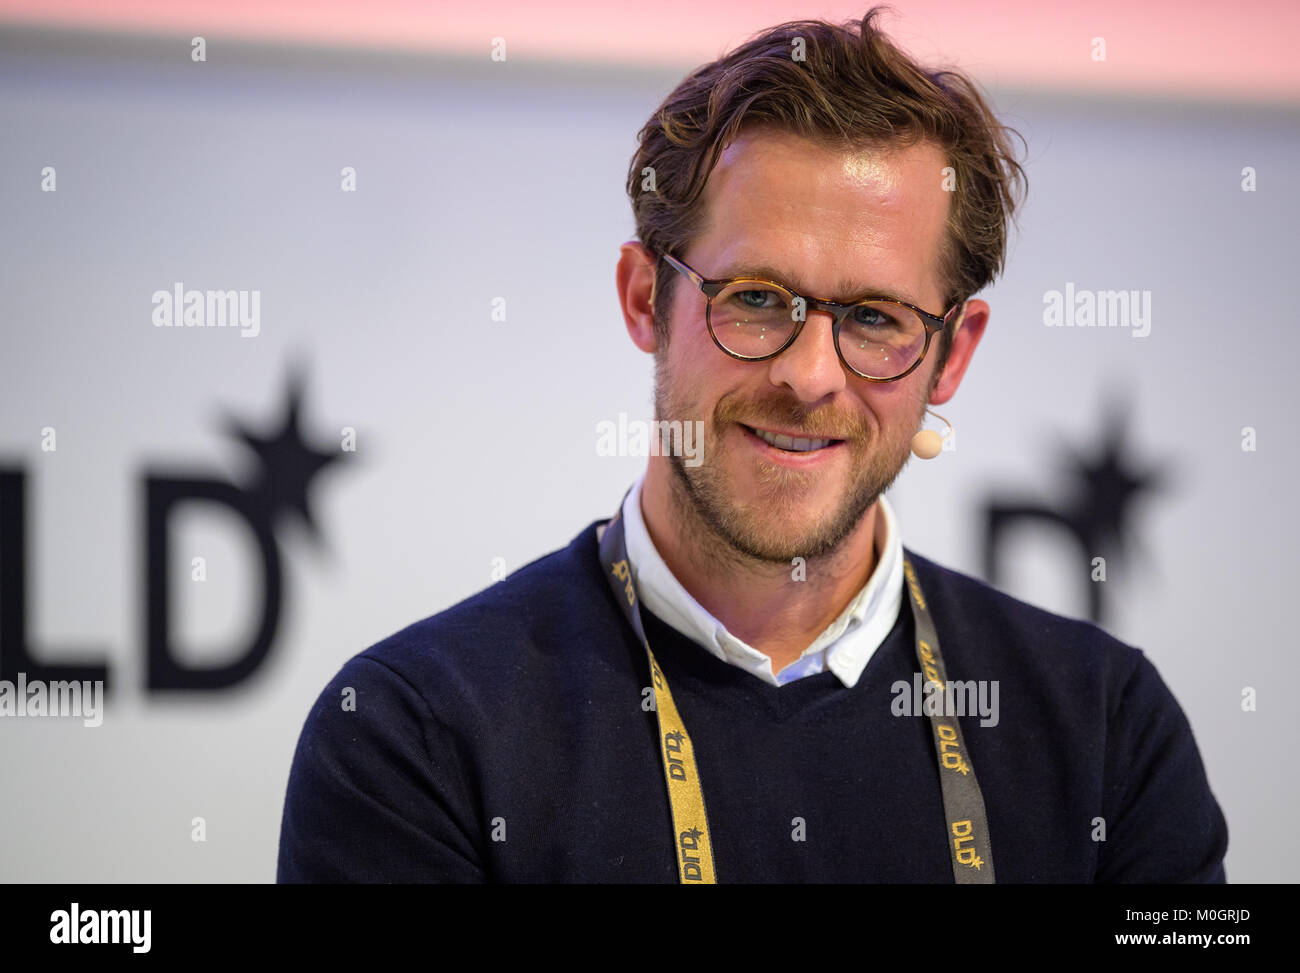 Munich, Germany. 22nd Jan, 2018. Robert Gentz, co-founder of Zalando,  speaks at the innovation conference Digital-Life-Design (DLD) in Munich,  Germany, 22 January 2018. The three-day conference aims to attract  technological, political and